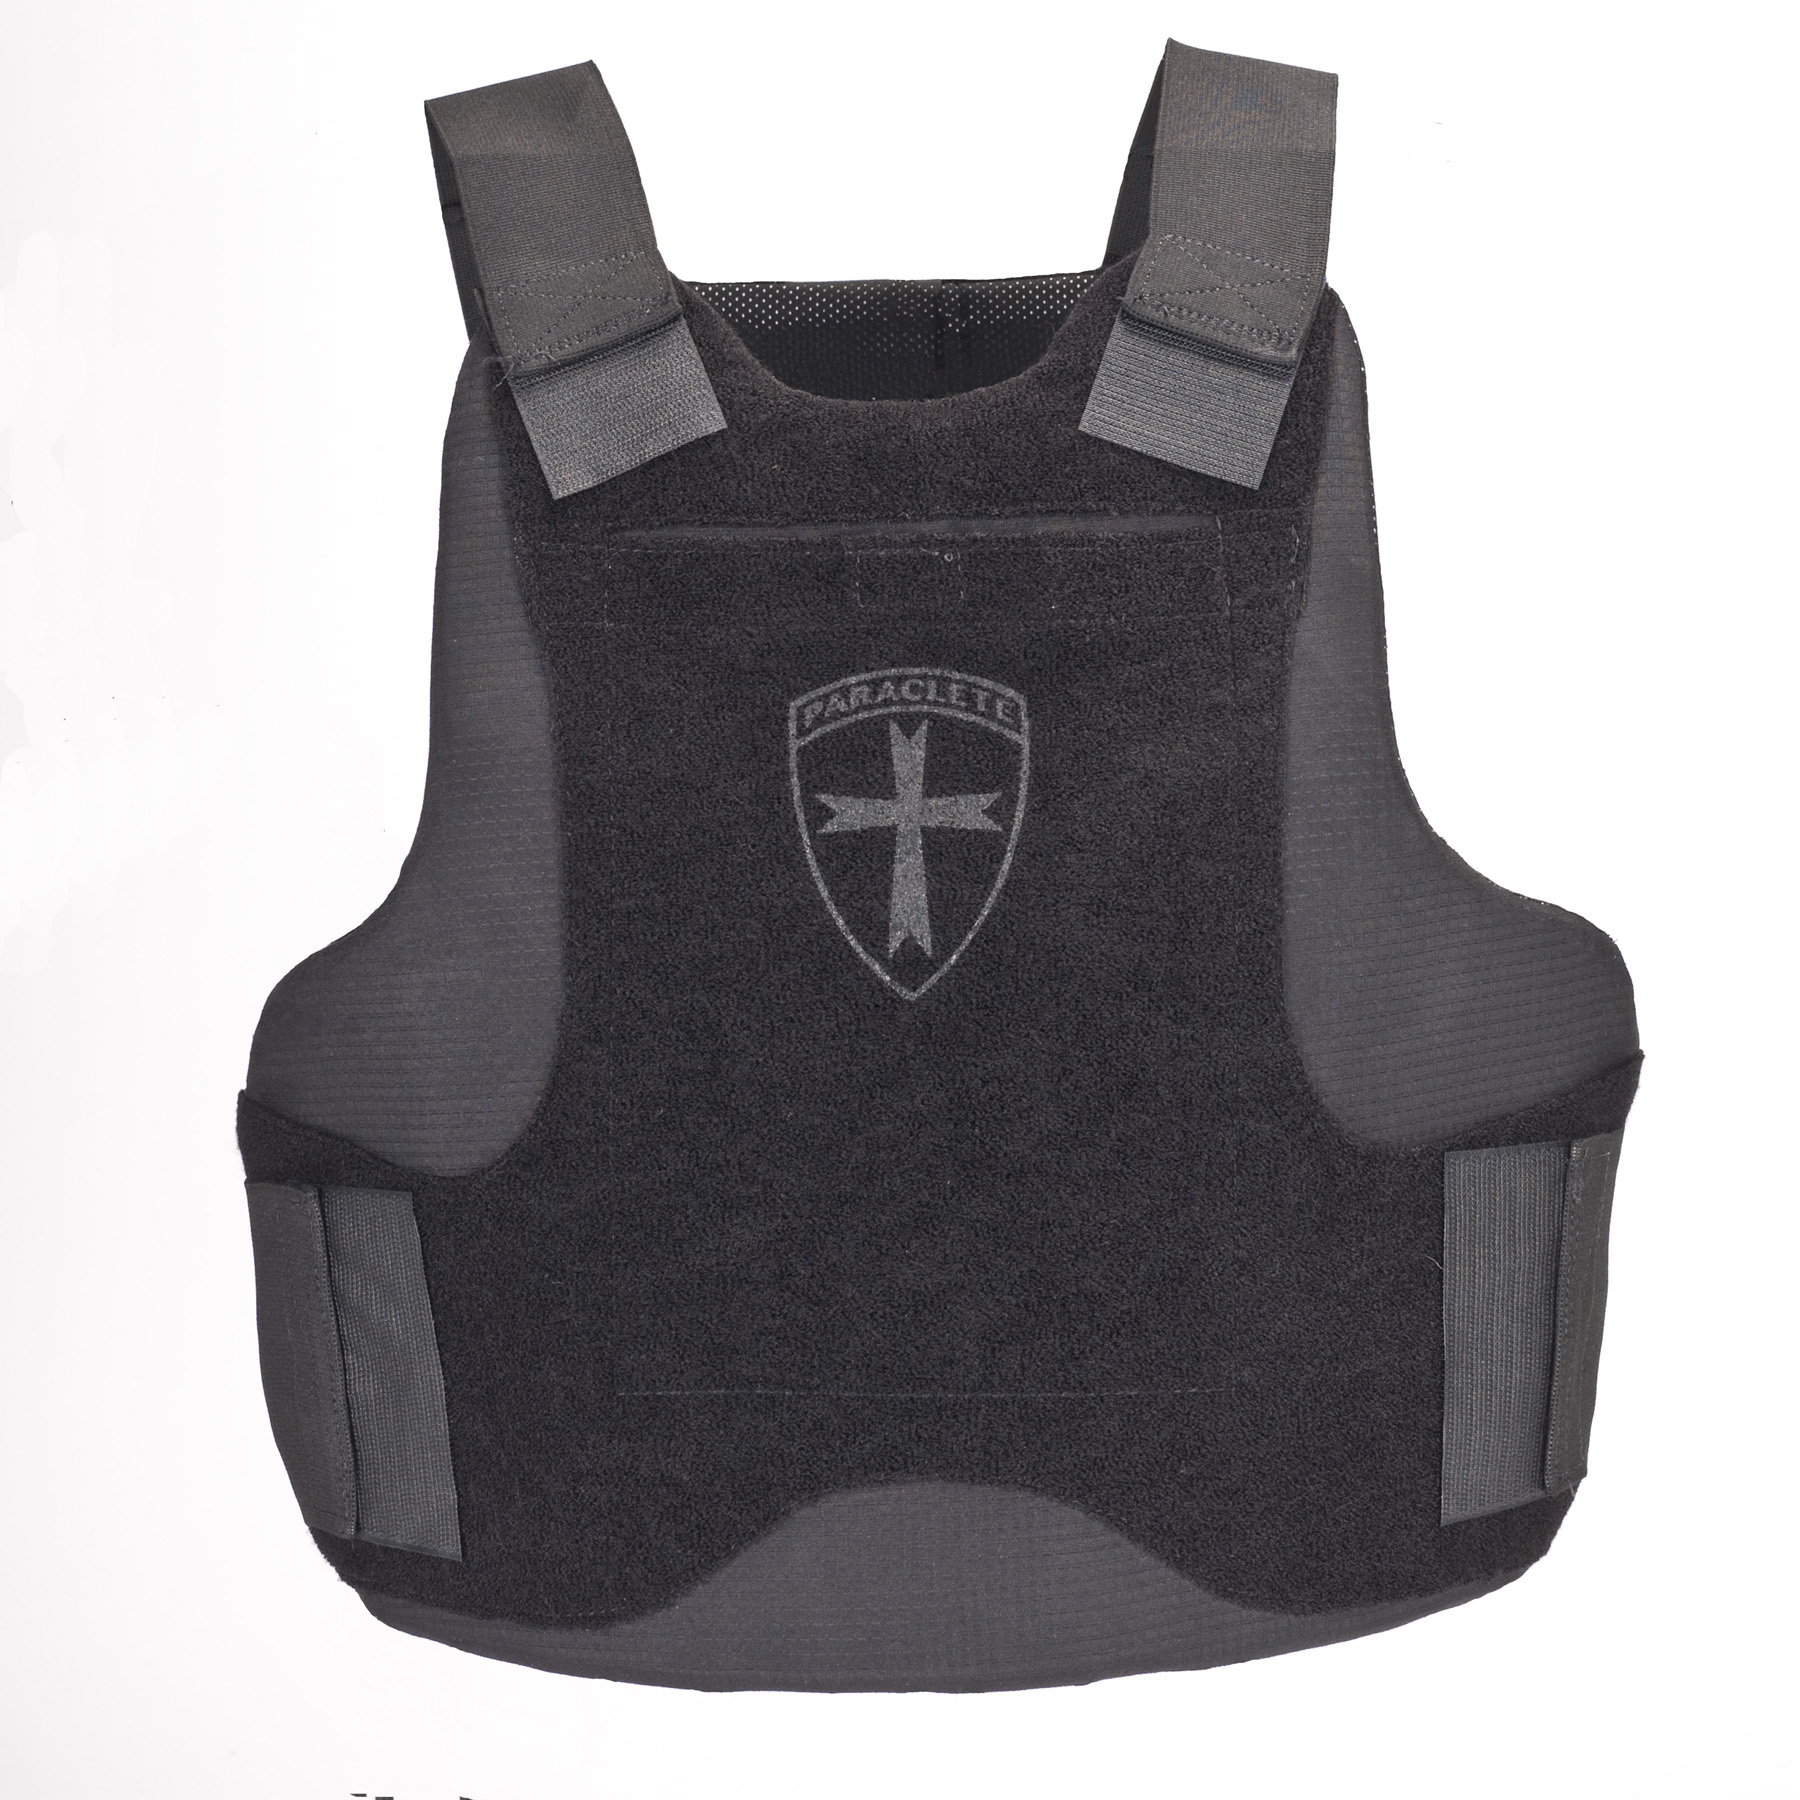 Shield Series of Concealable Body Vests